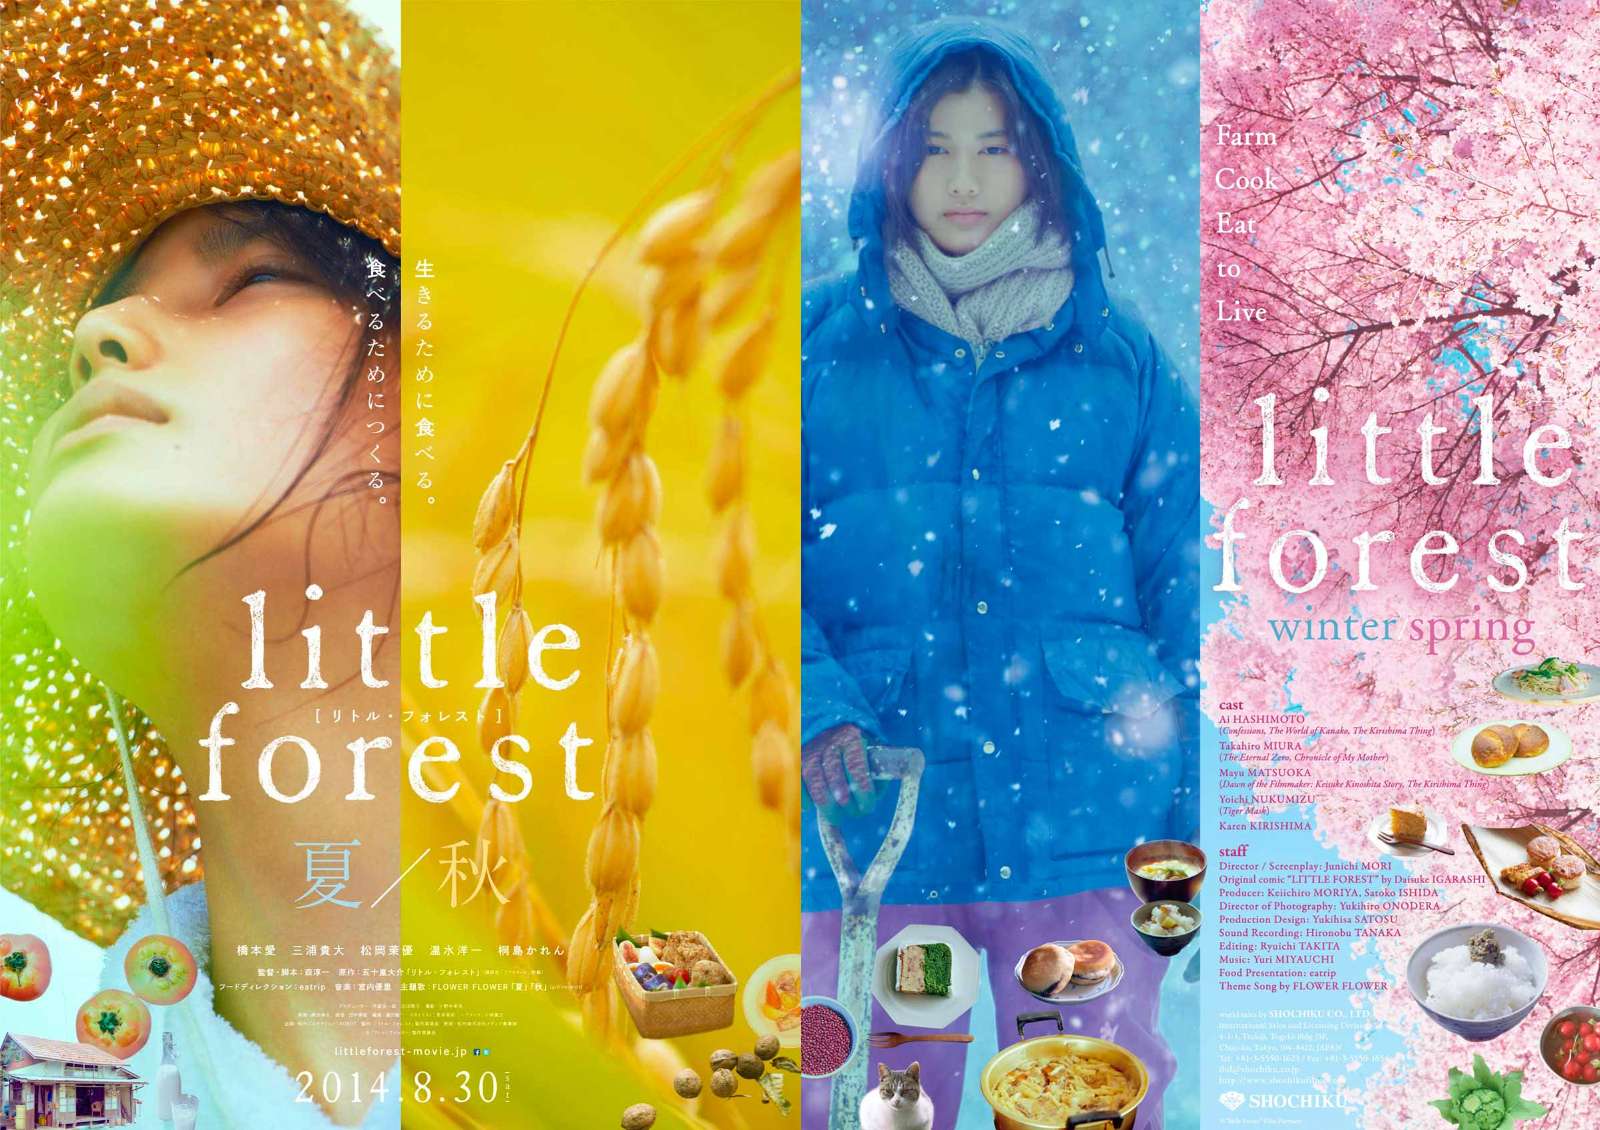 Little Forest, phim chữa lành, review phim, phim lẻ hay